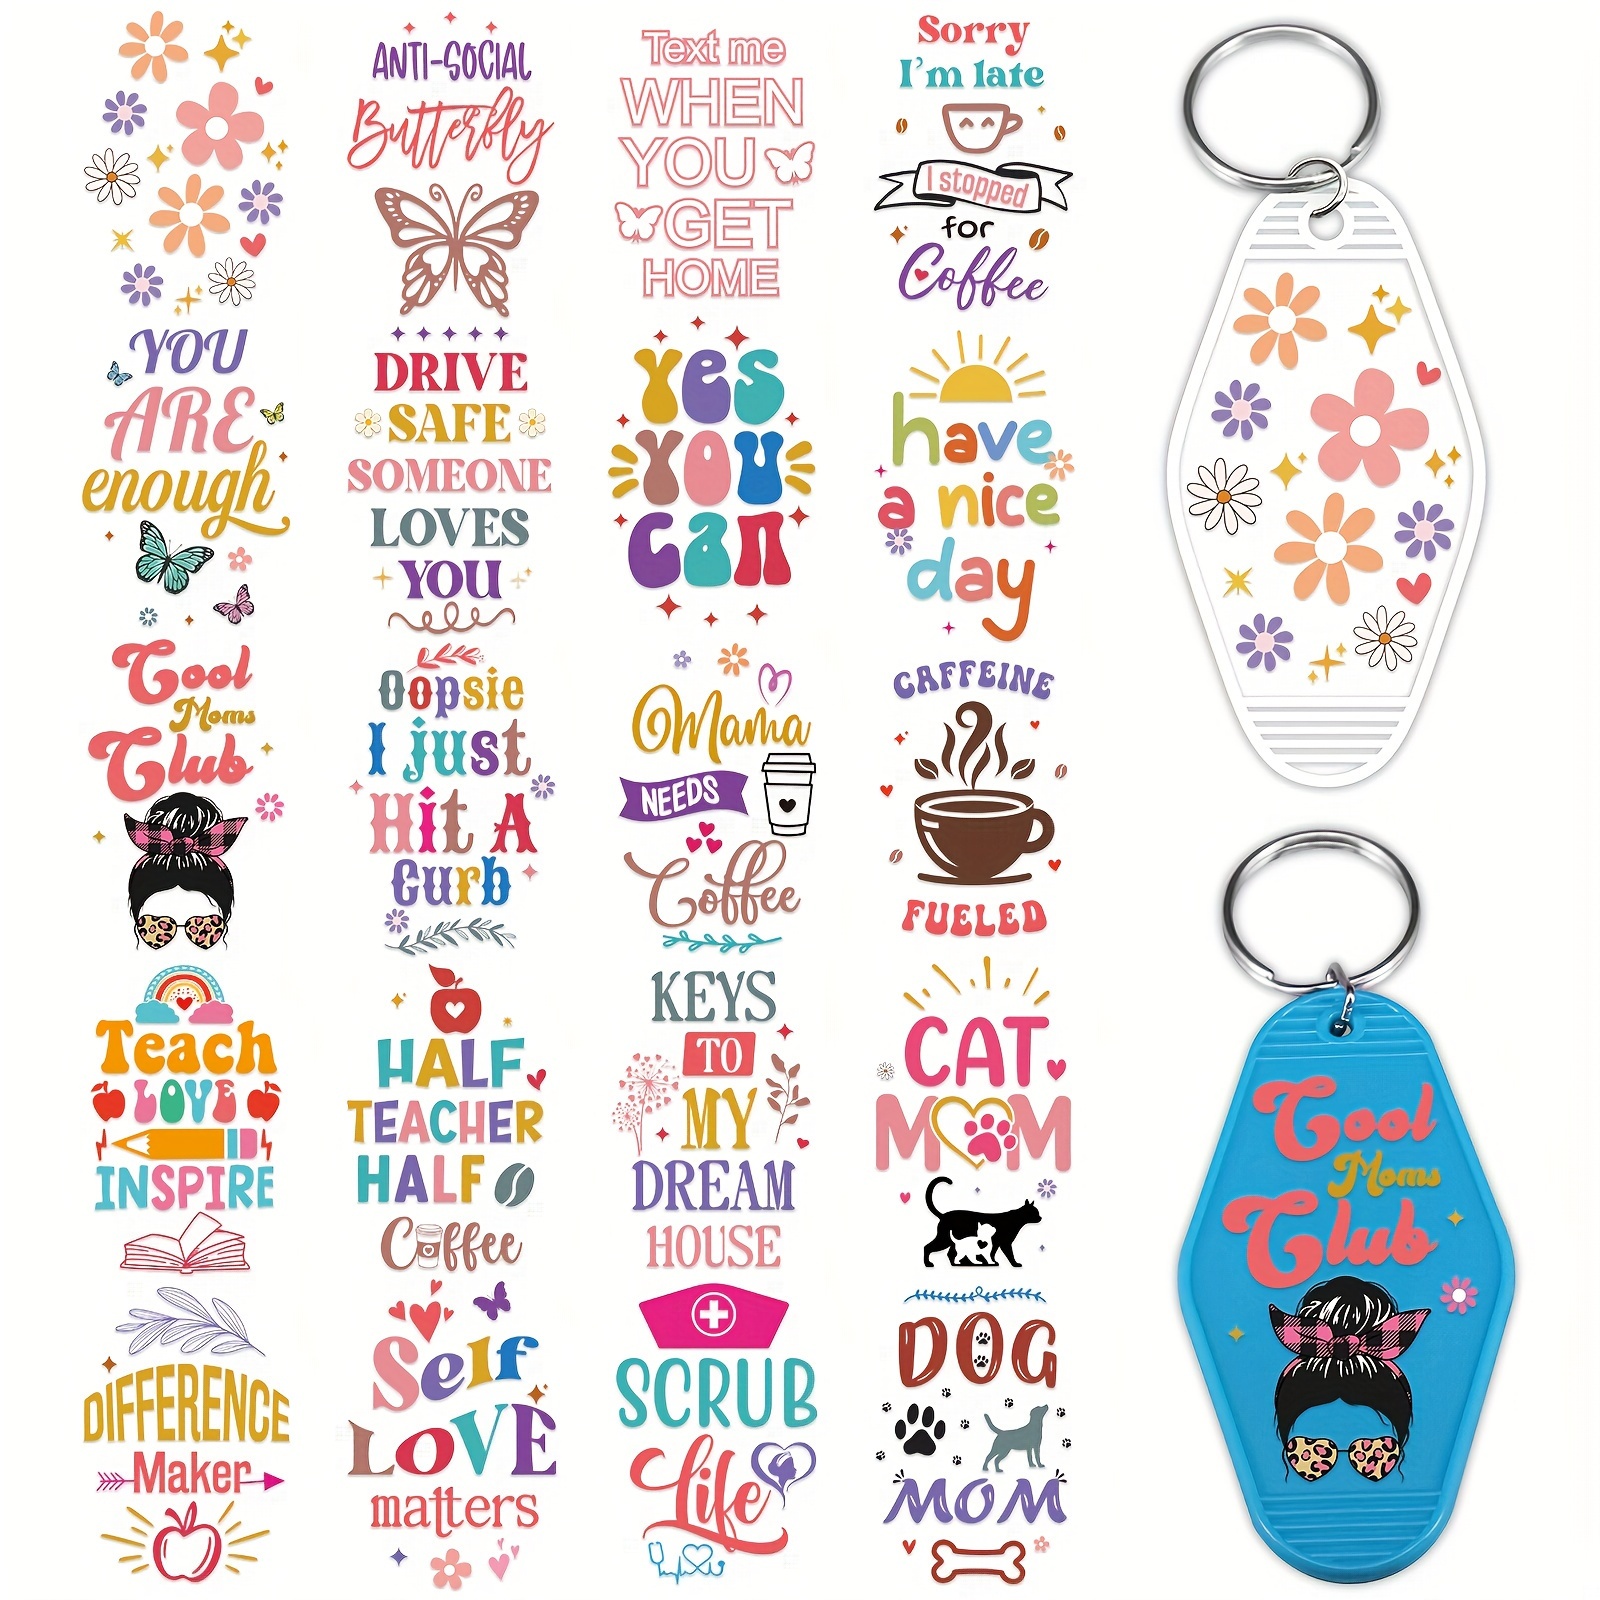 

Inspirational Uv Dtf Stickers, 80pcs, Cartoon & Motivational Designs, Waterproof Transfer Decals For Keychains, Teacher, Pet Owners, Butterfly Patterns, English Text - Paper Material